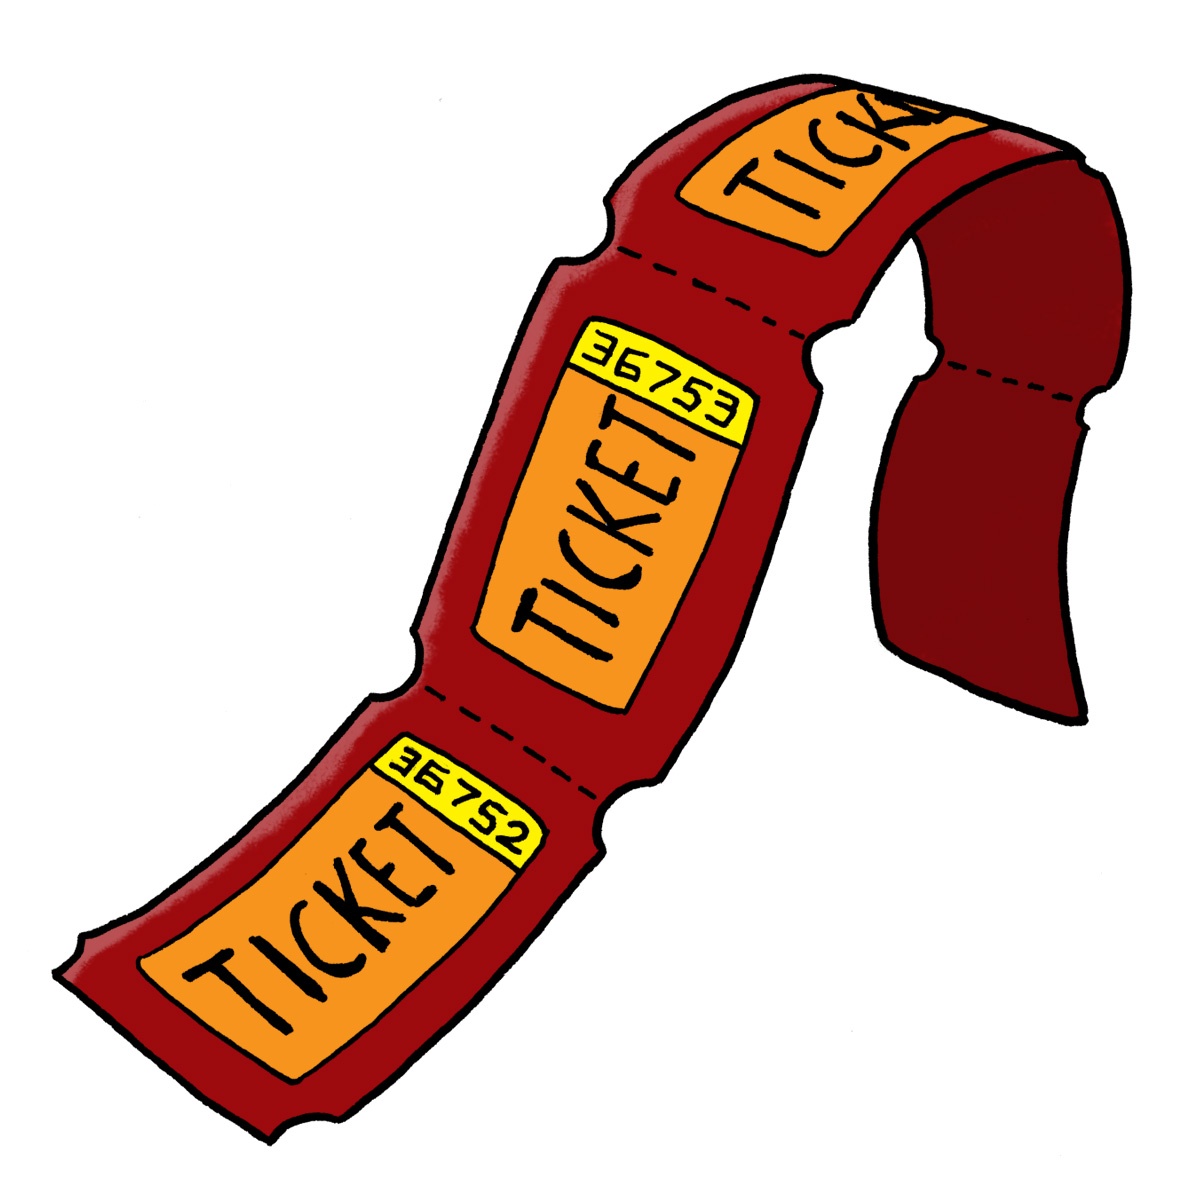 Carnival ticket clipart